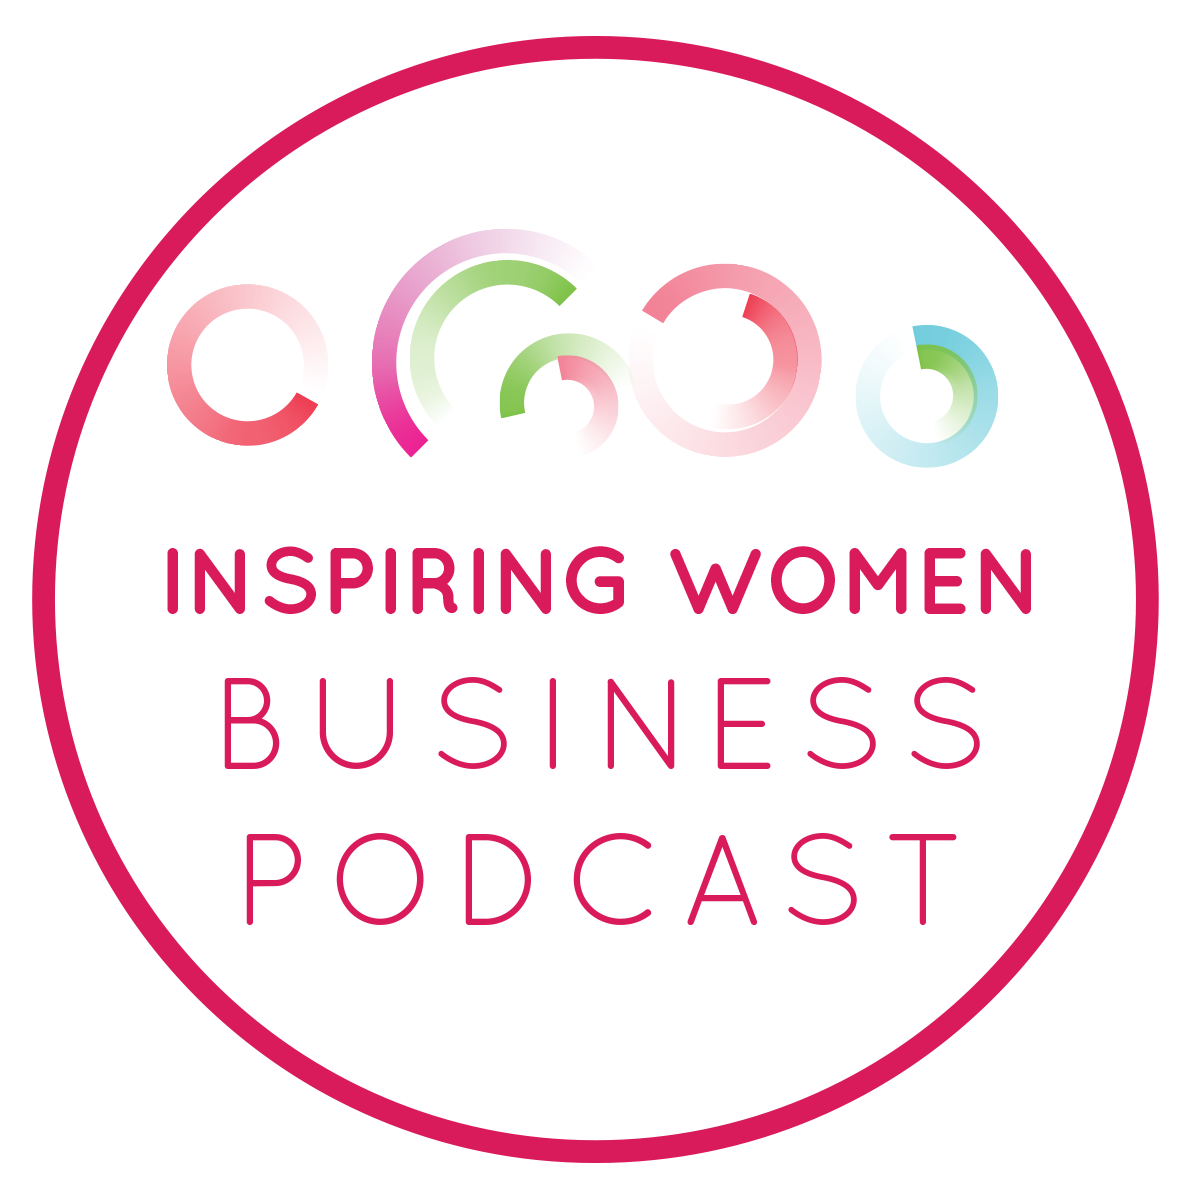 Inspiring Women Business Podcast uncovering inspired women in Northern Ontario business.